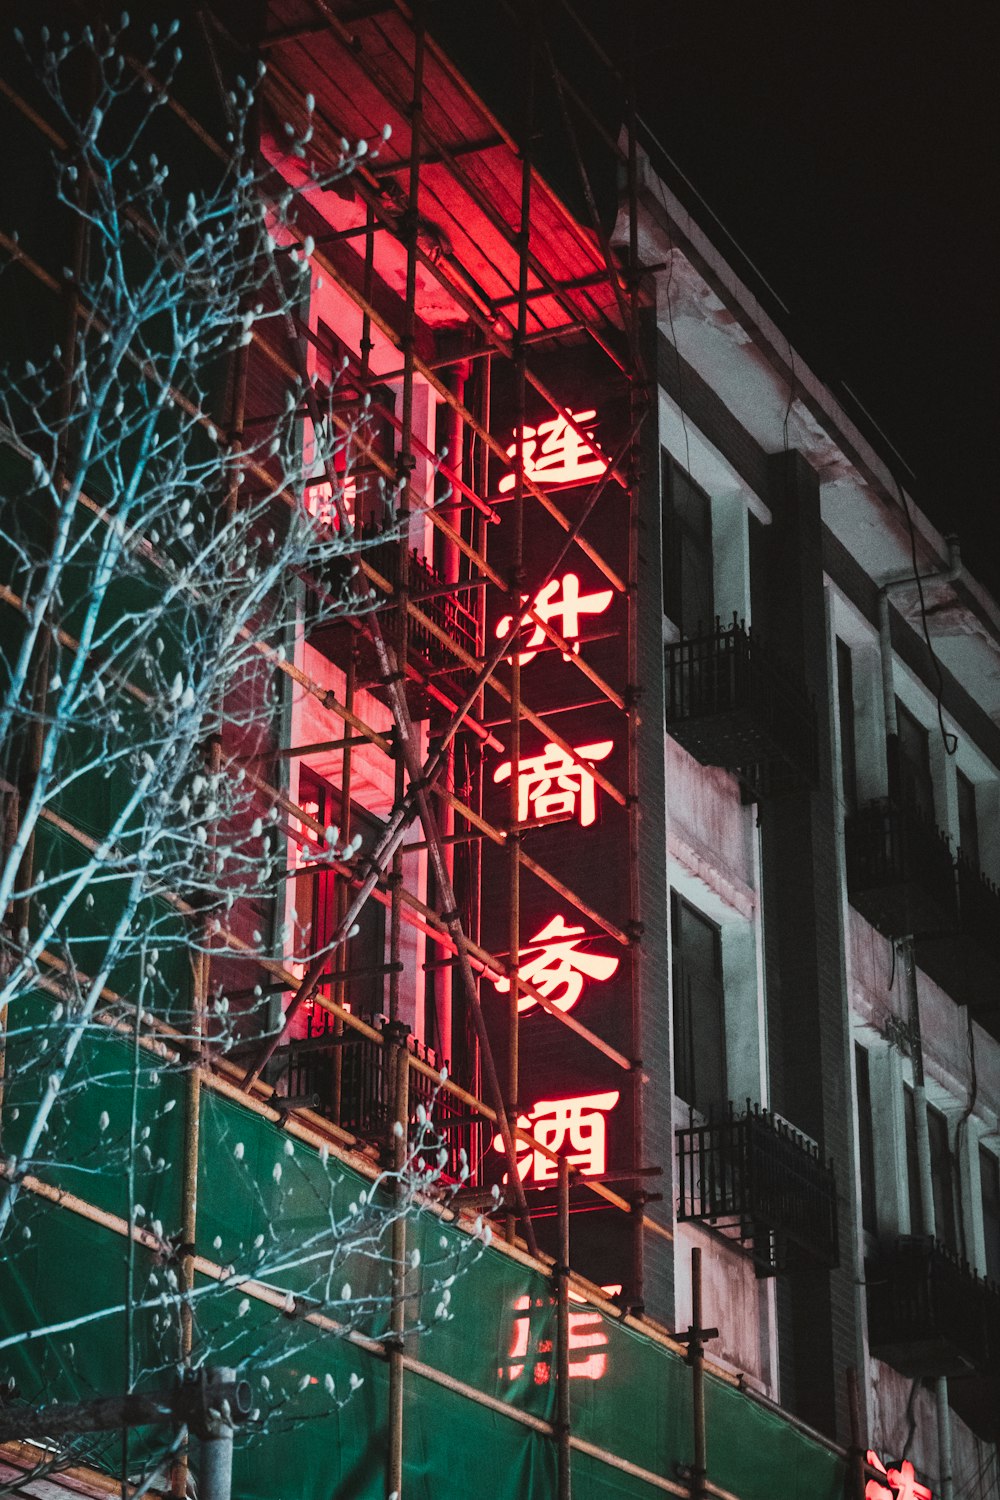 red and white kanji text neon light signage